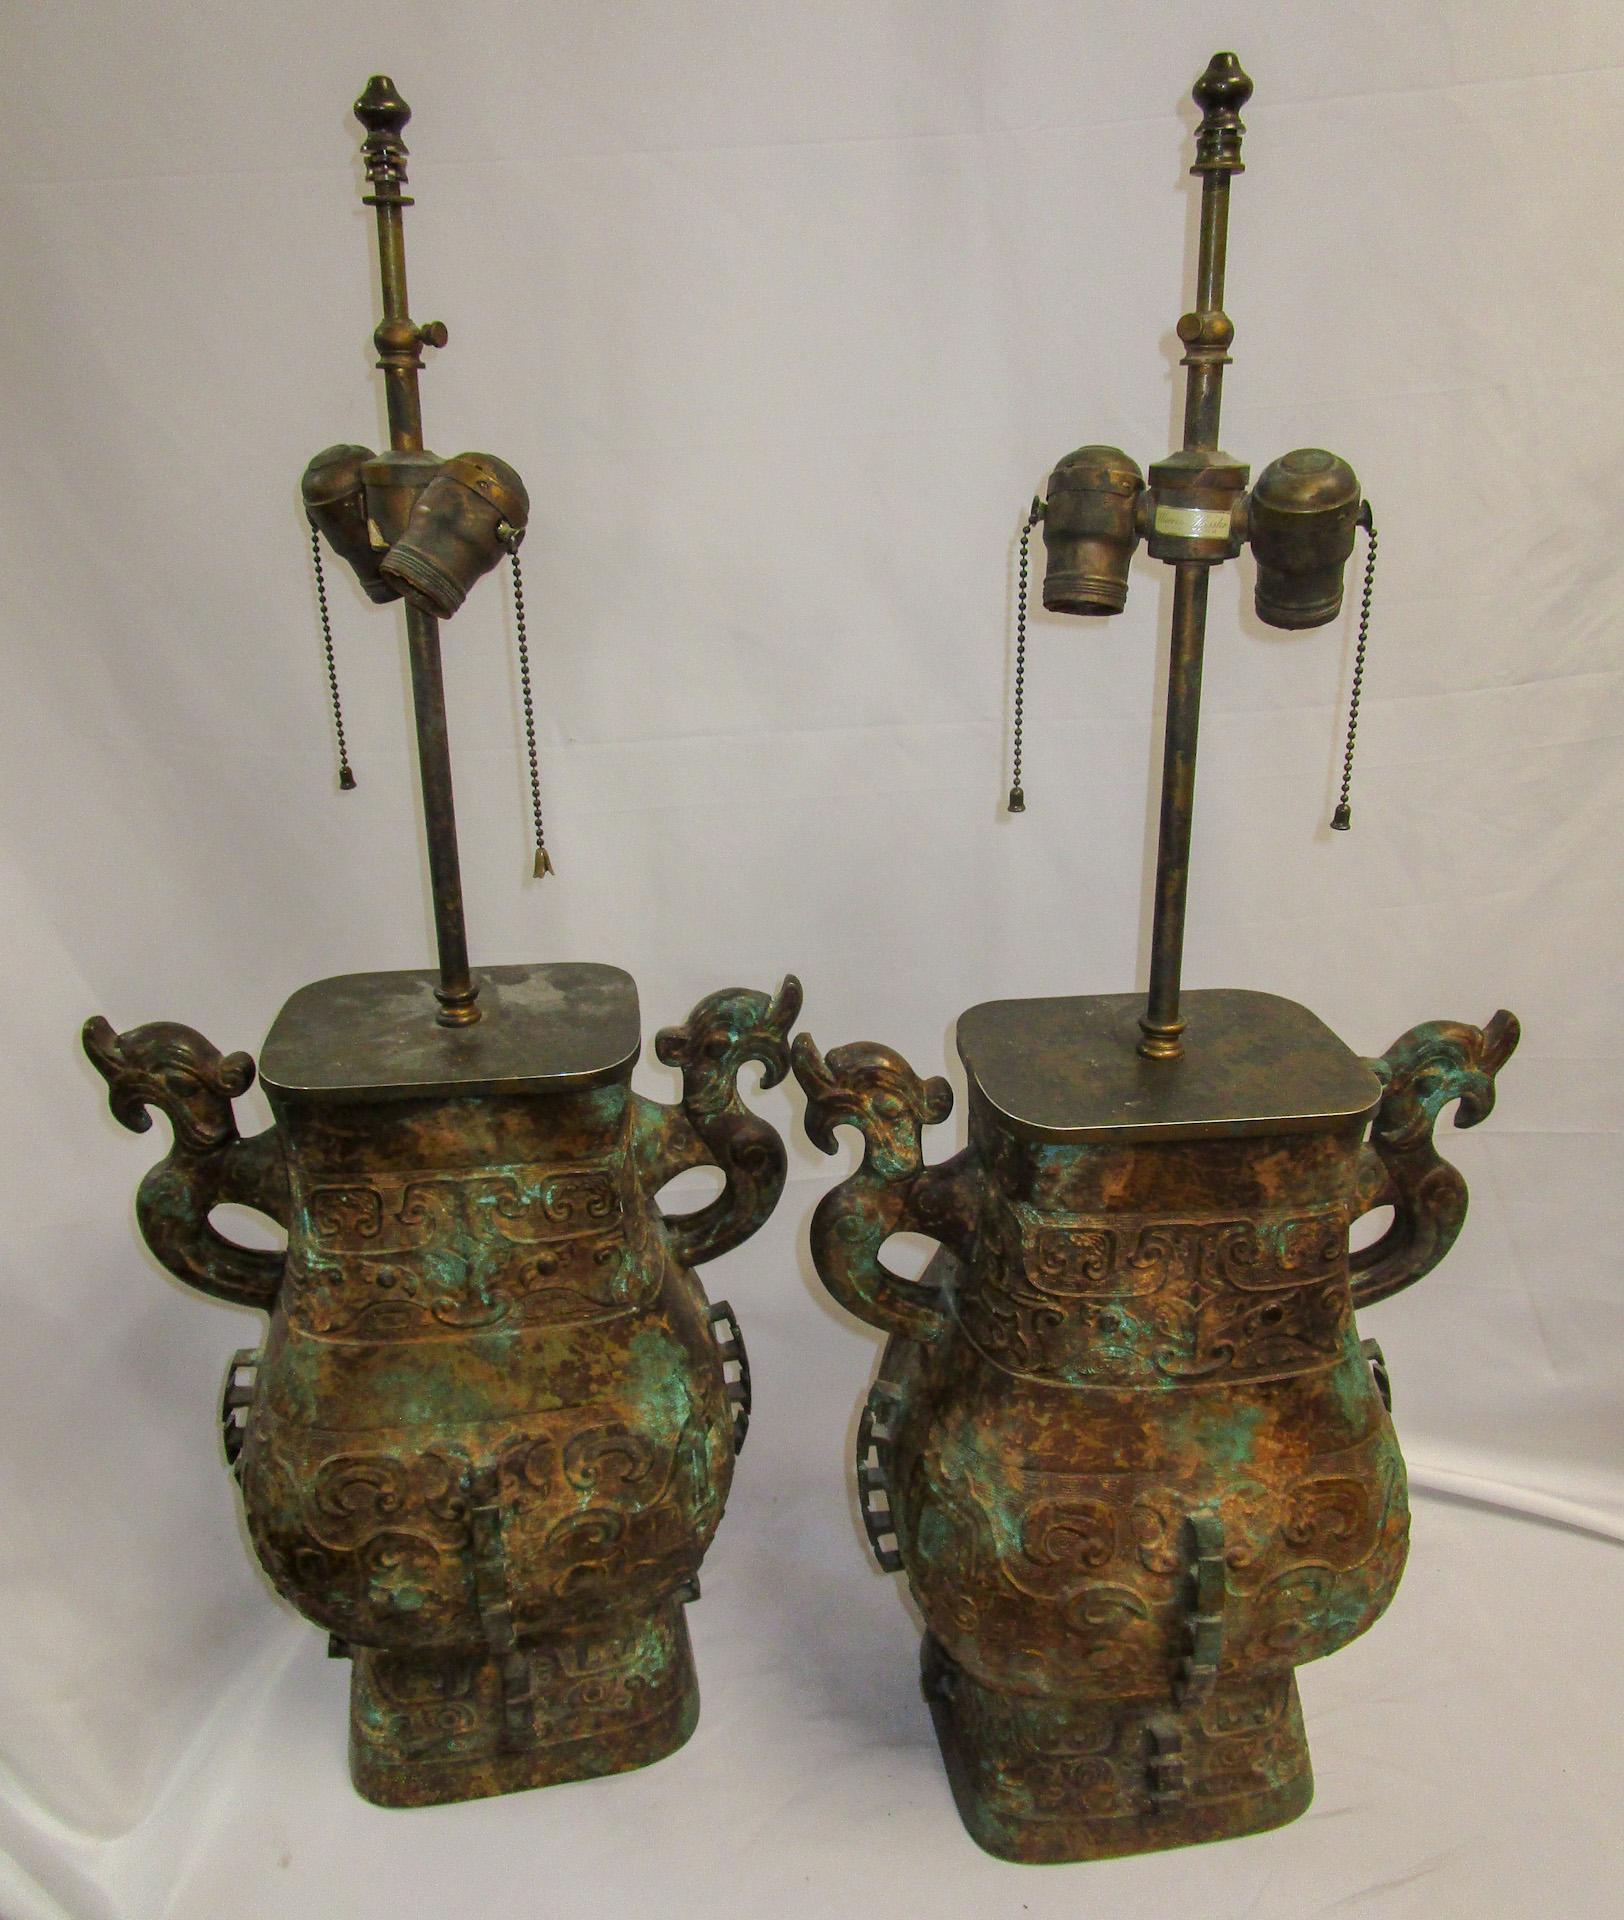 This handsome pair of bronze lamps feature verdigris patination on etched bodies imitative of an archaic Asian style, twin dragon form loop handles and brass electric double light fittings,  The 1960 paper label Warren Kessler New York is still